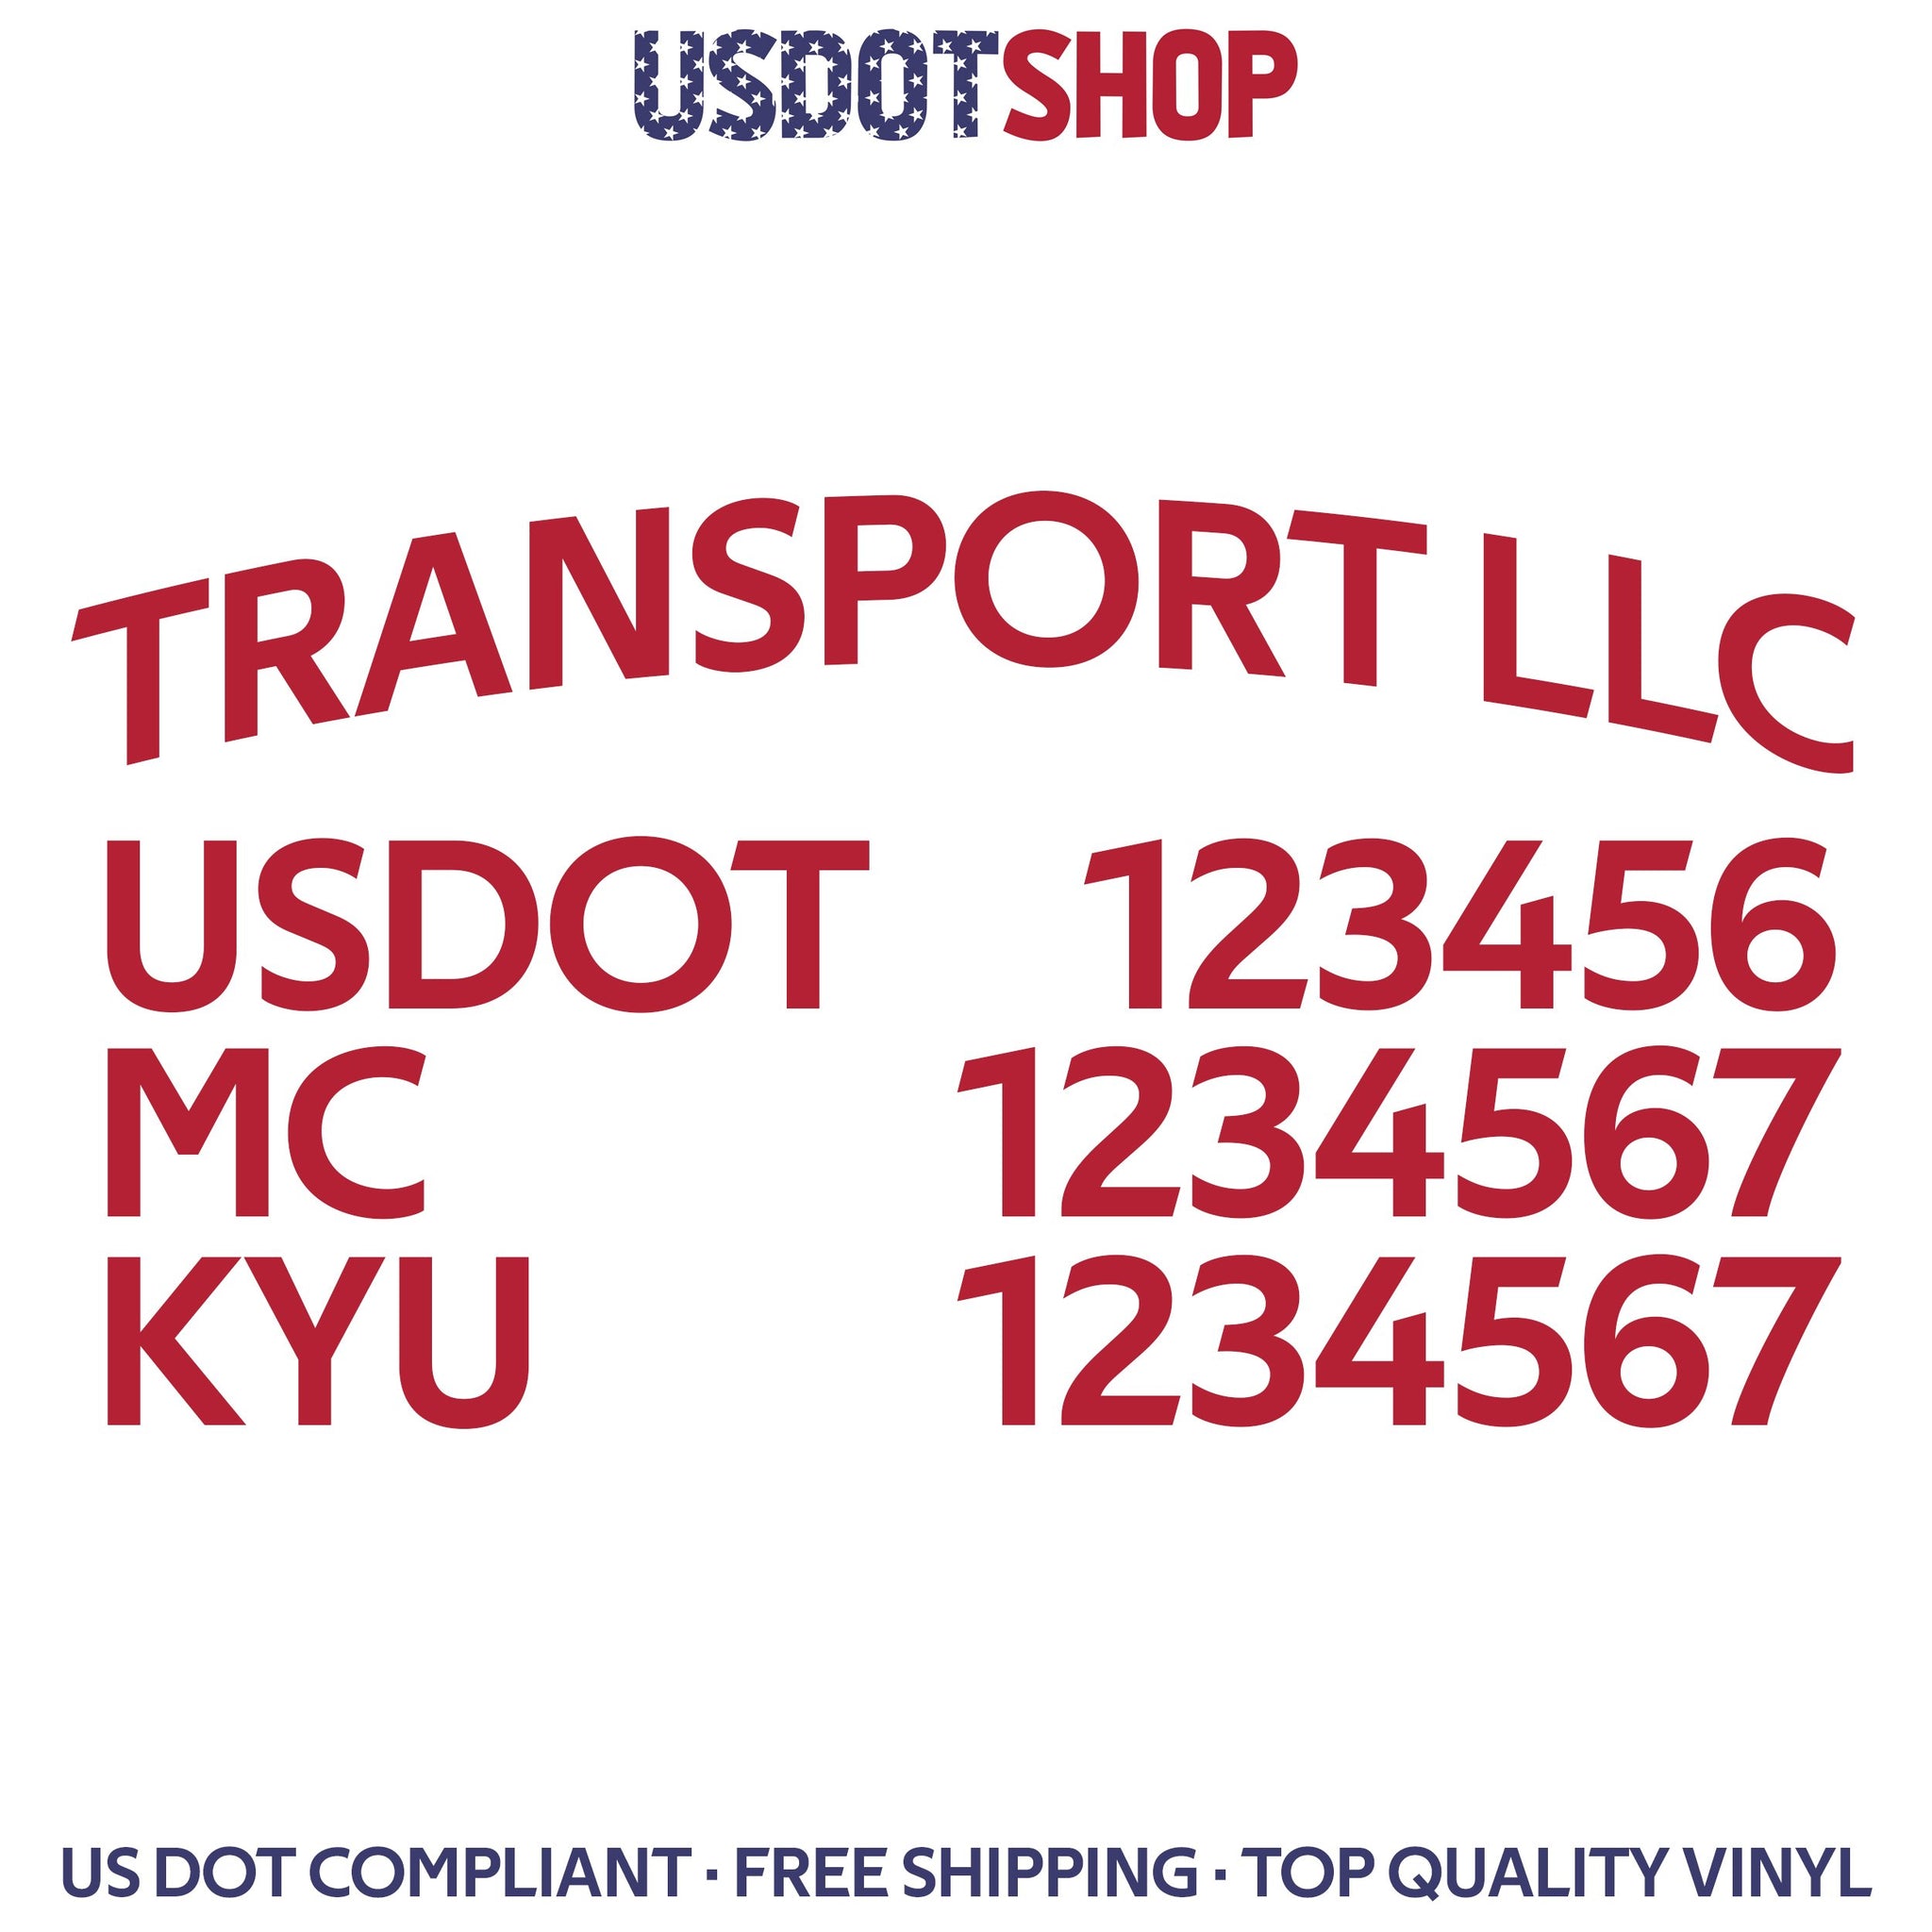 arched company name, usdot, mc kyu number decal sticker